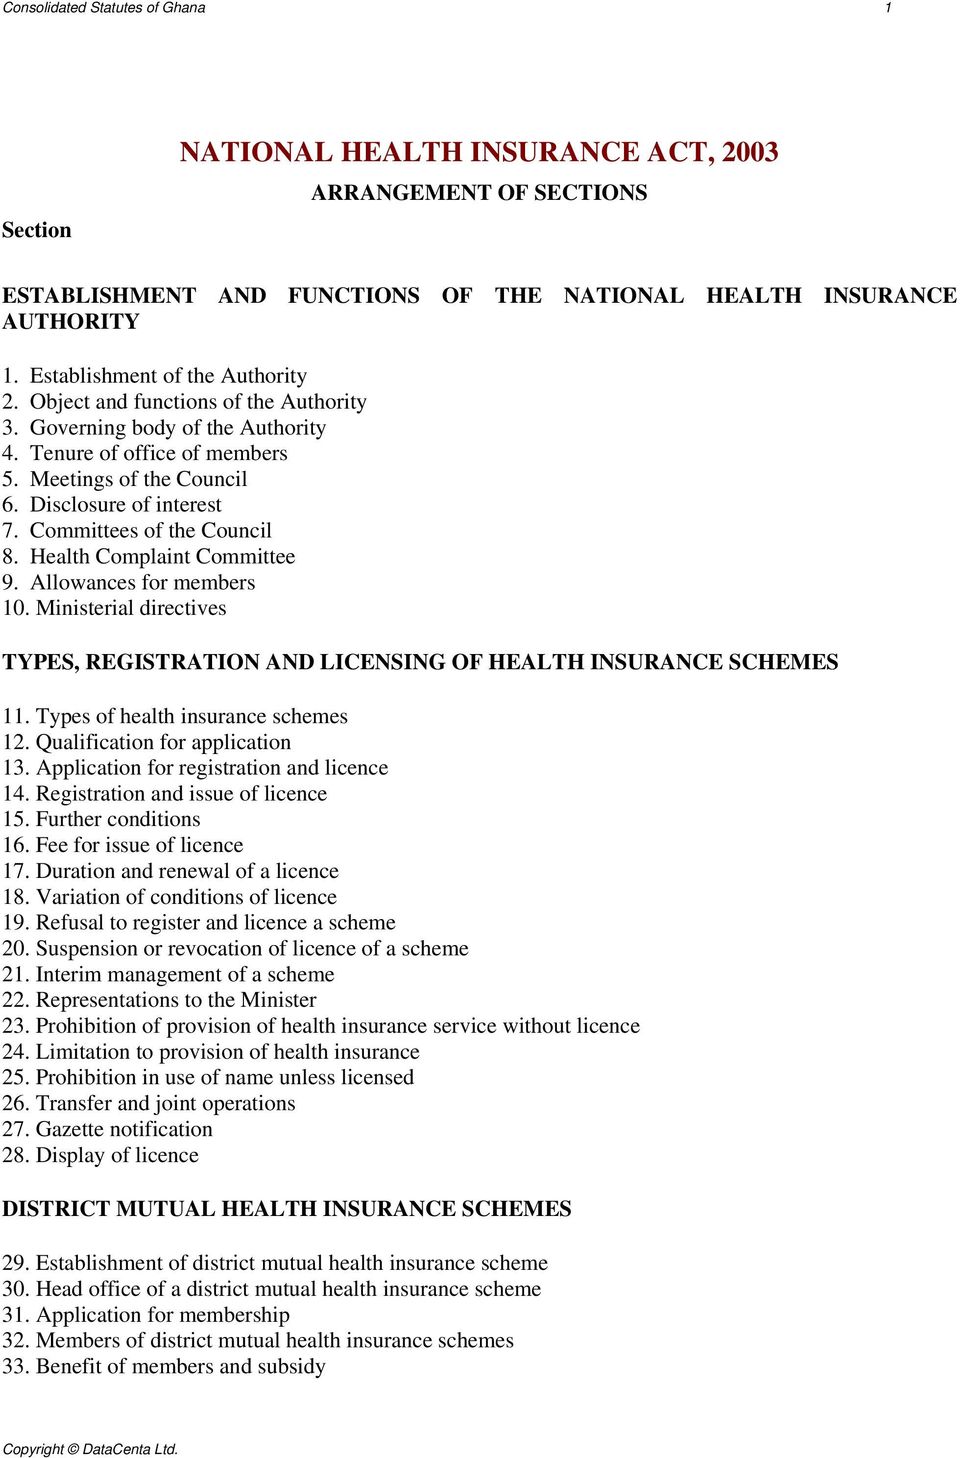 Committees of the Council 8. Health Complaint Committee 9. Allowances for members 10. Ministerial directives TYPES, REGISTRATION AND LICENSING OF HEALTH INSURANCE SCHEMES 11.